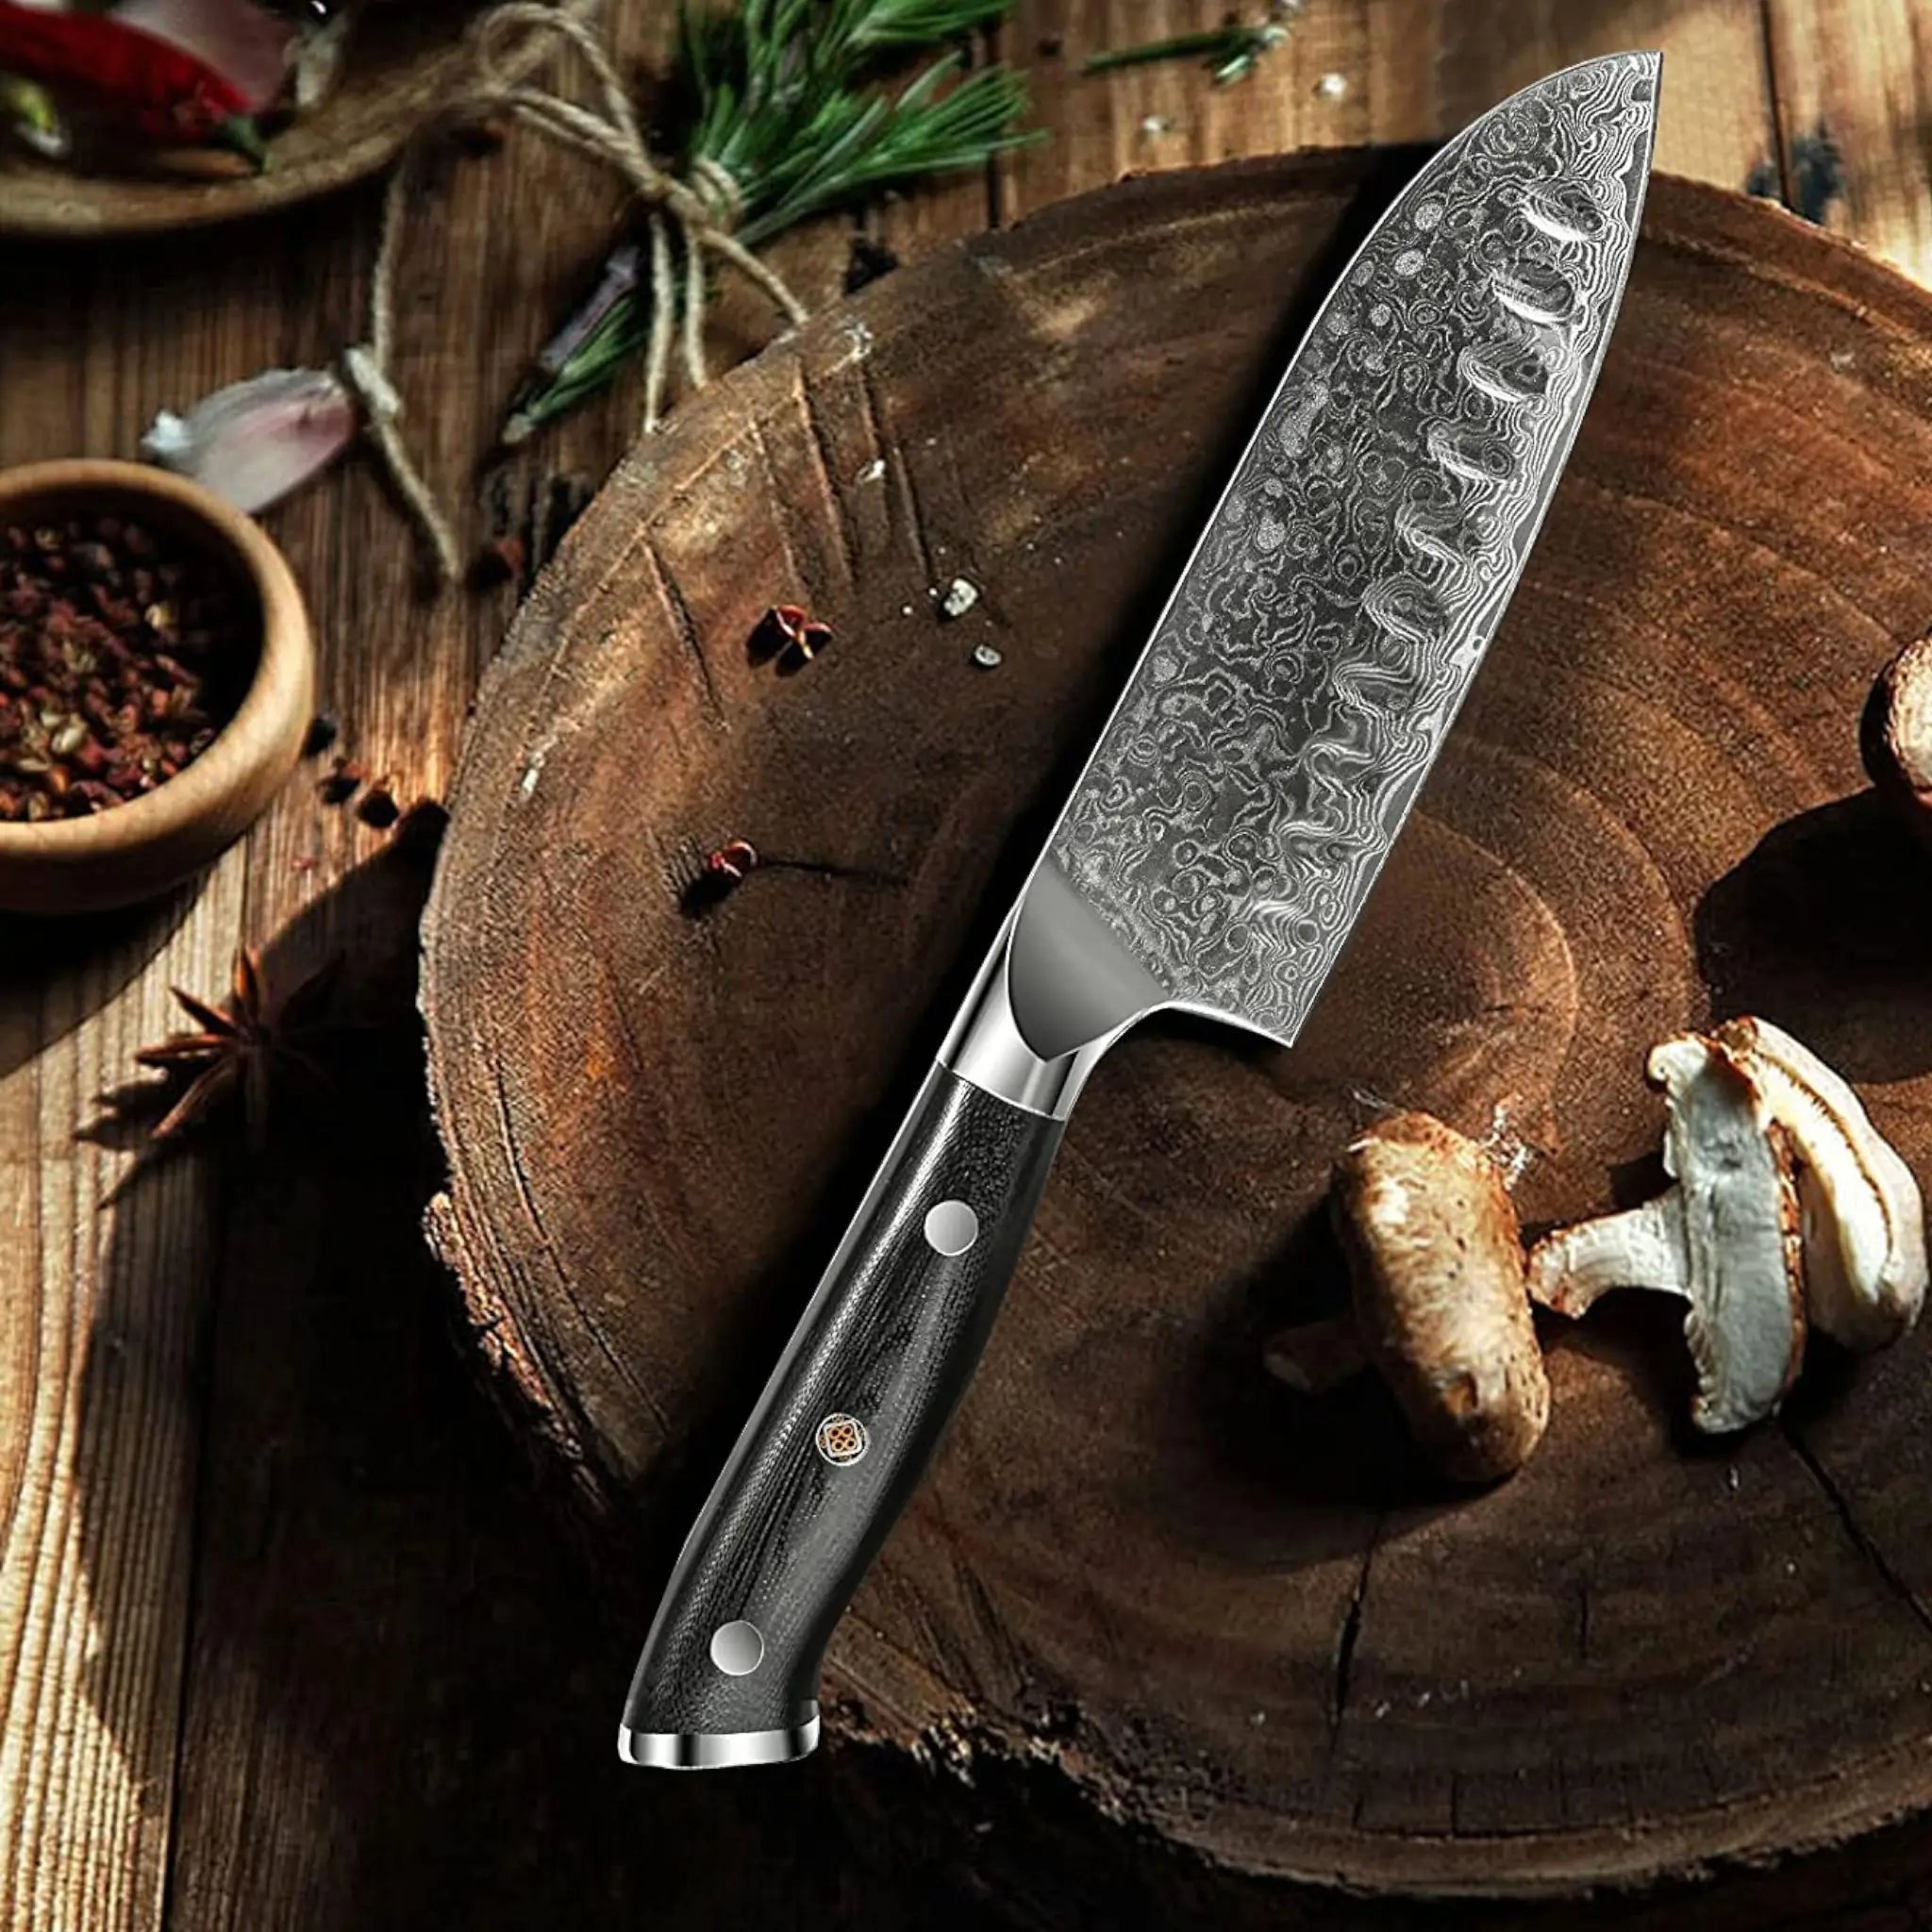 Why Buy a Damascus Steel Kitchen Knife Set?